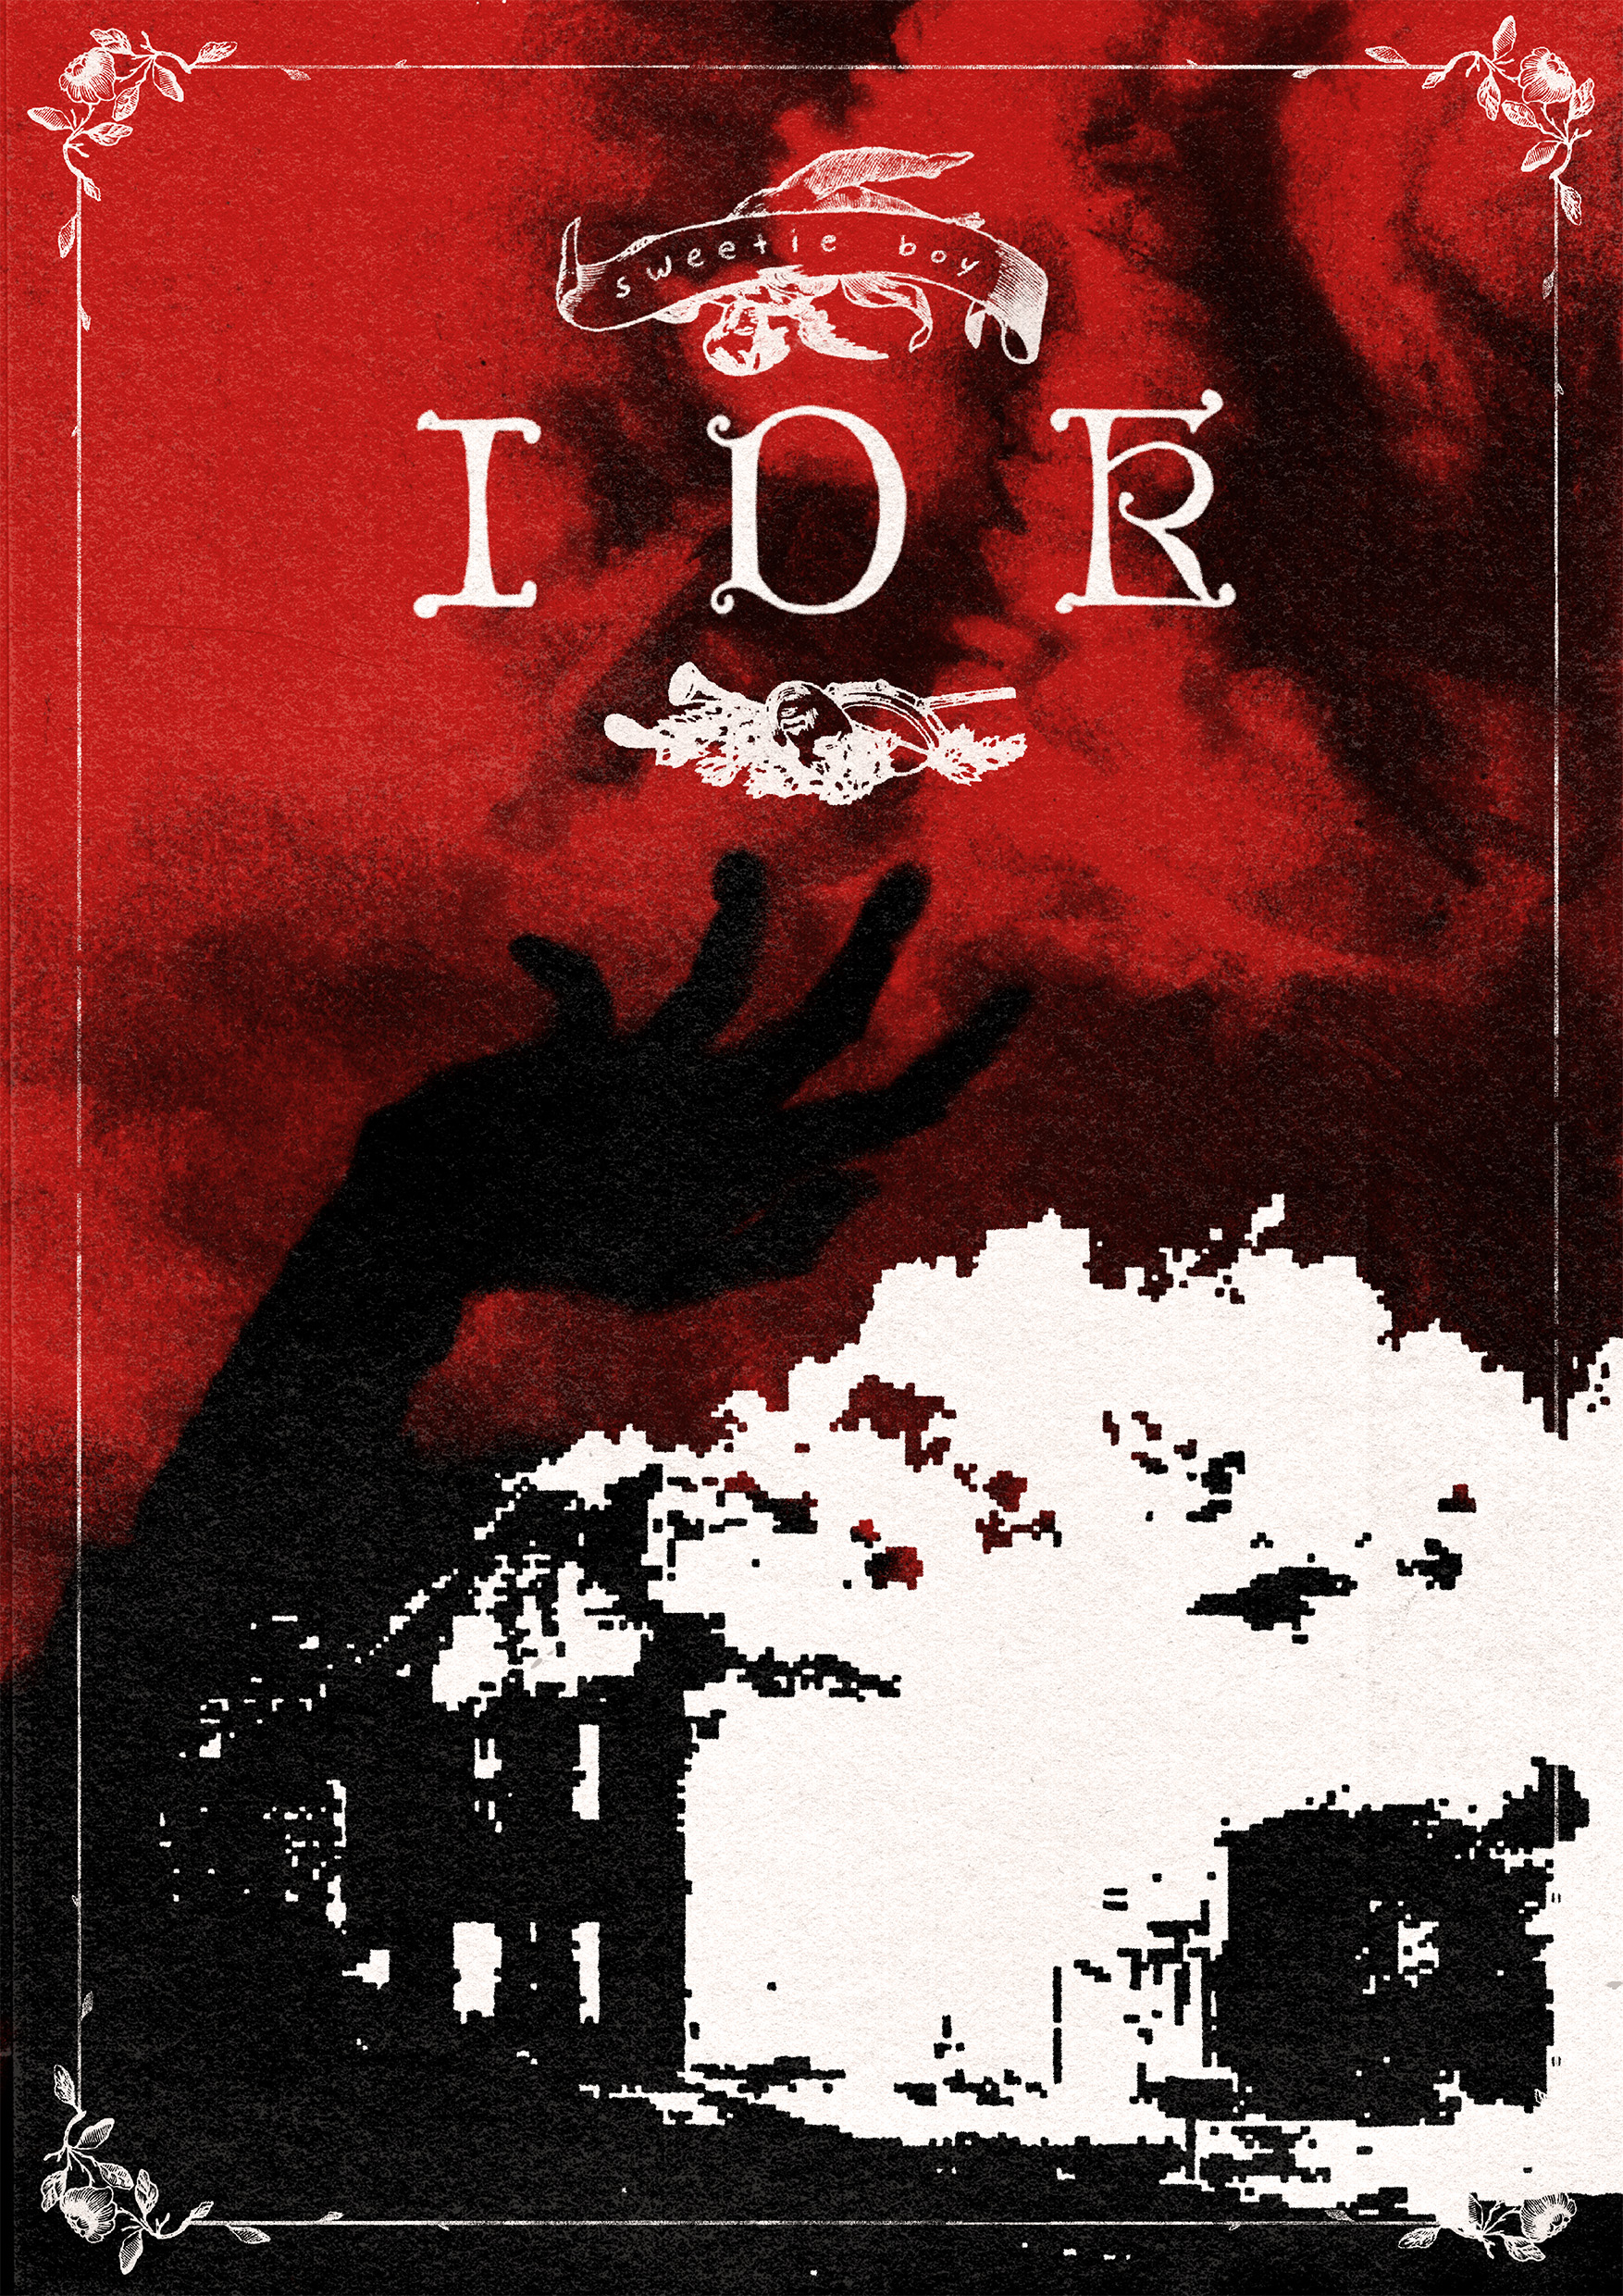 A poster for the song IDK by Sweetie Boy featuring Forester. Showing a black and white illustration of a house at the bottom of the poster, with a silhouette of a hand above the roof, in a cupping position. The letters IDK are above the hand, on a moody grey and red sky.